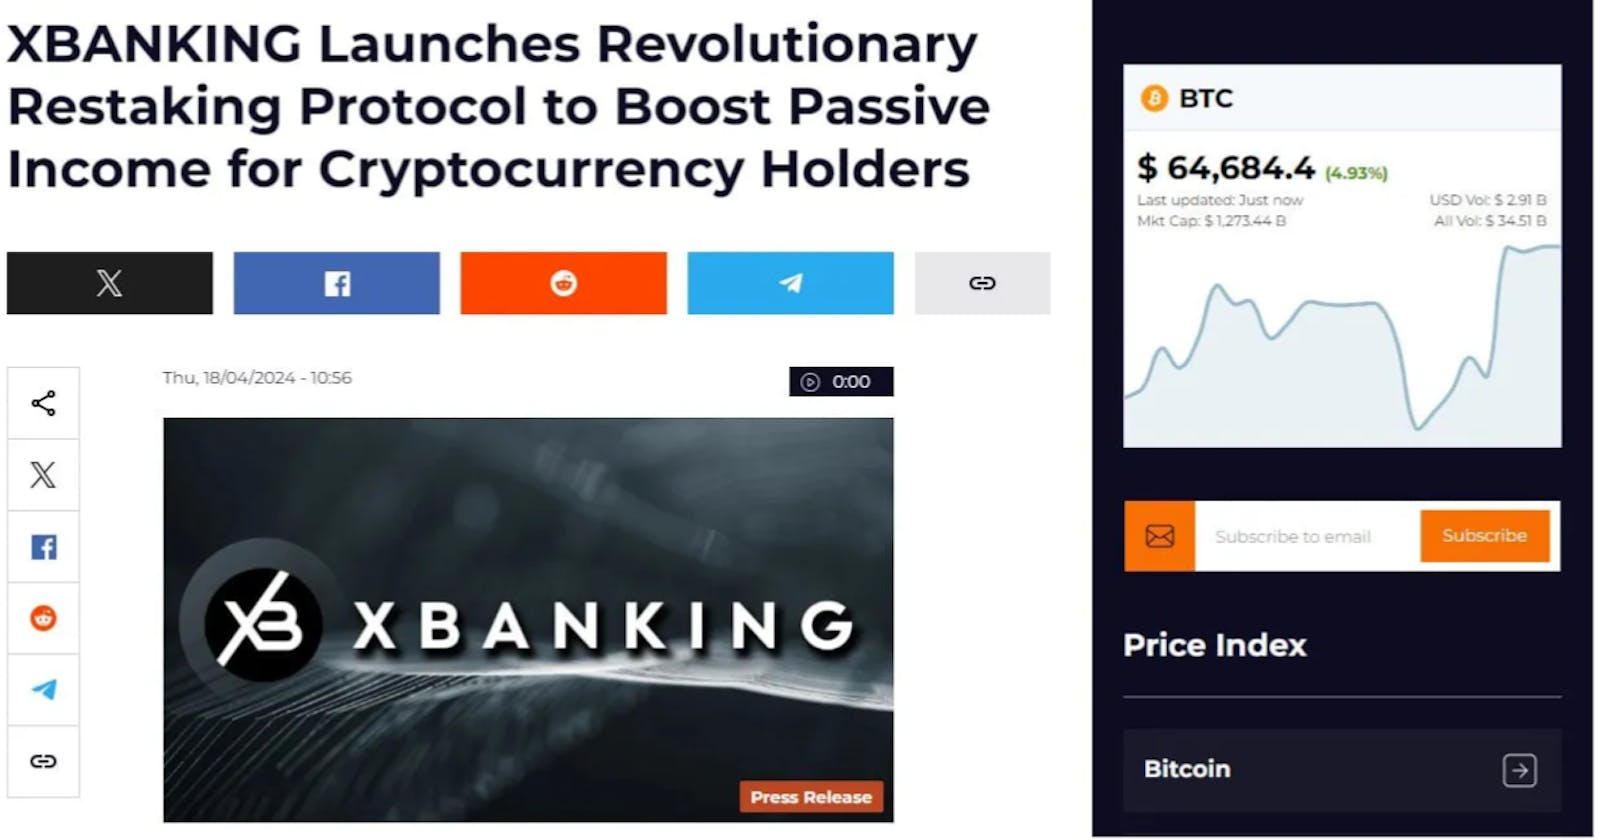 U.Today: XBANKING Launches Revolutionary Restaking Protocol to Boost Passive Income for Cryptocurrency Holders